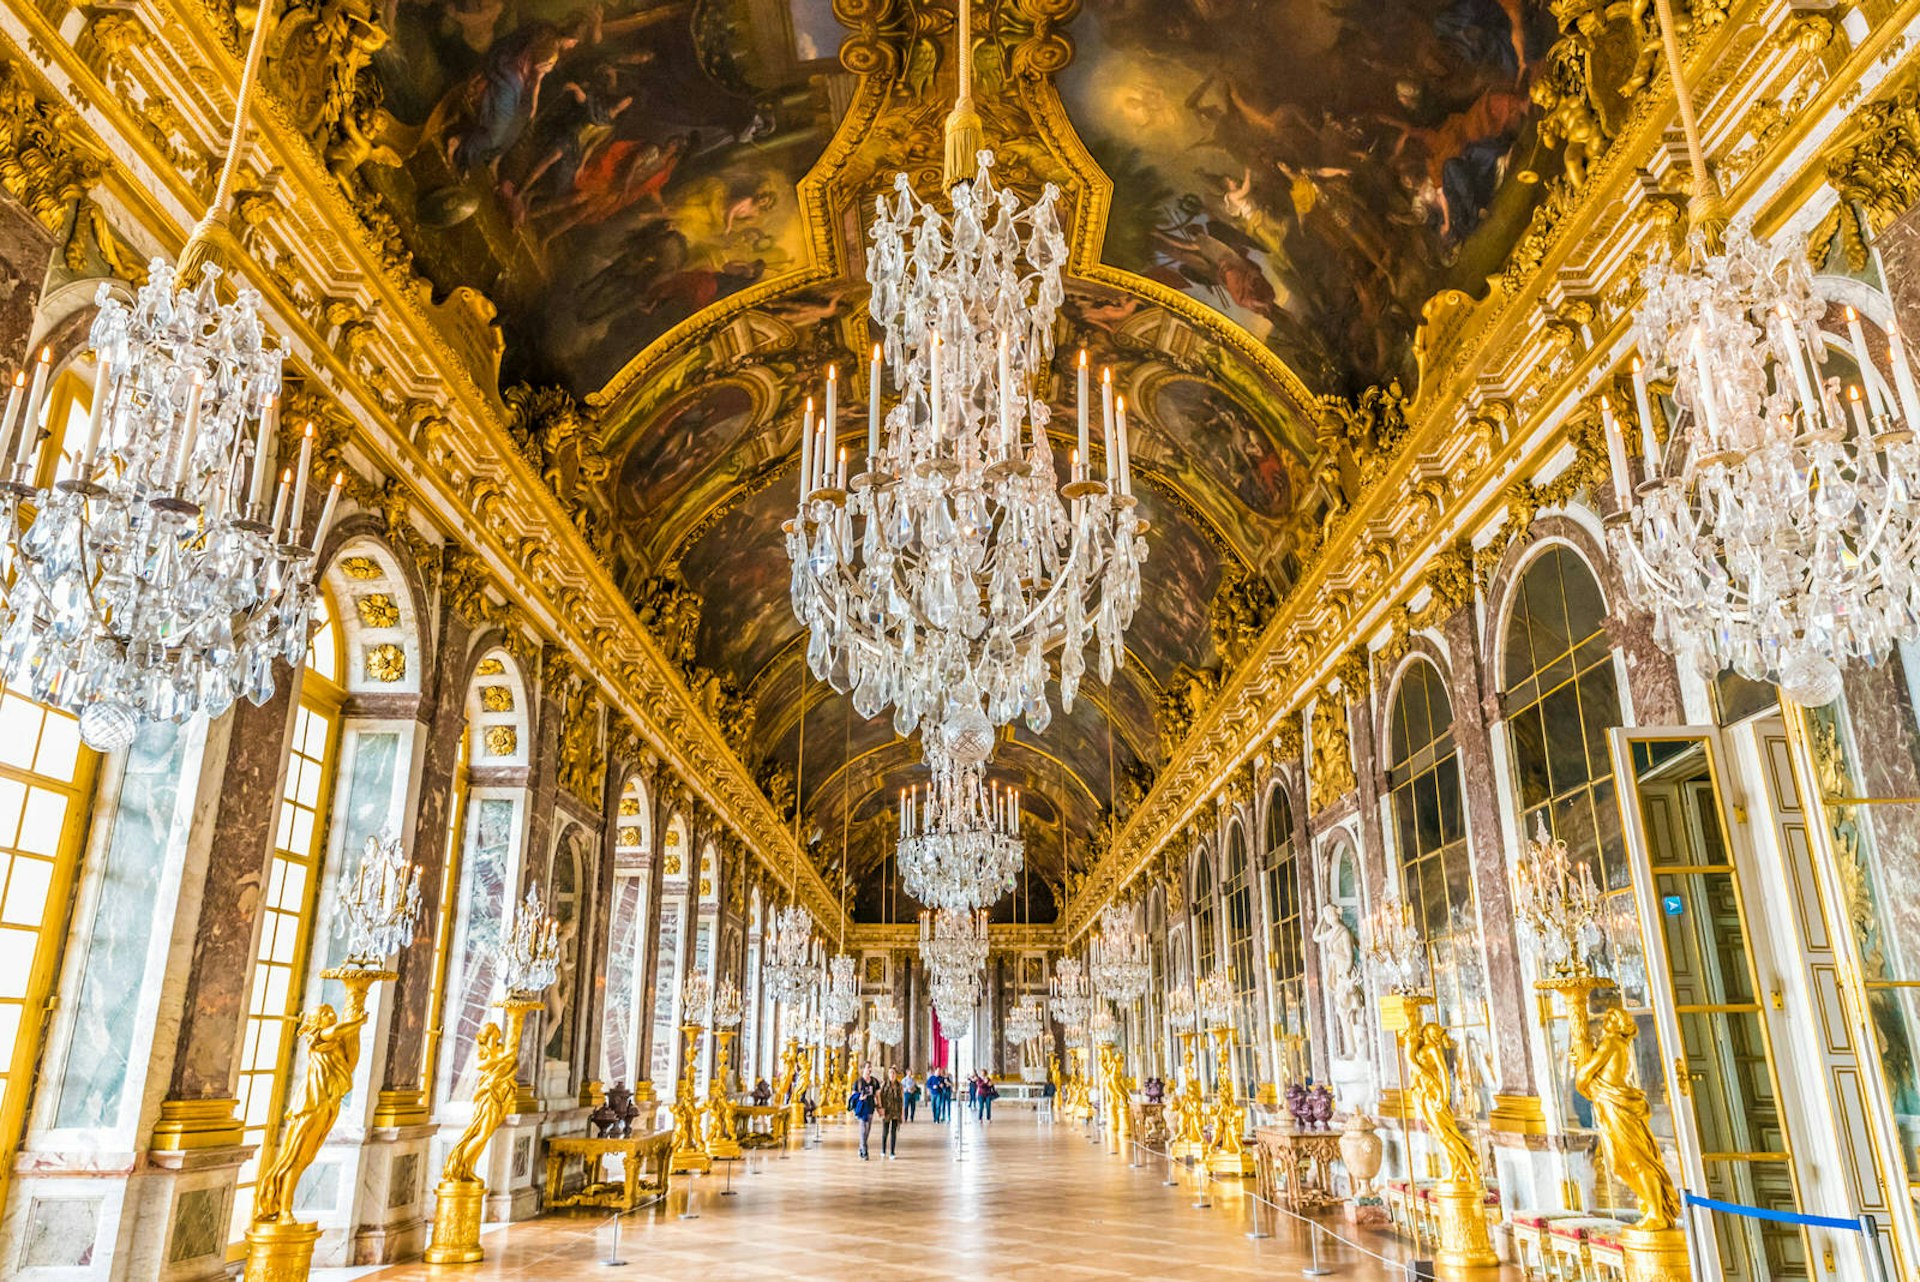 Interior fo the Château de Versailles: an extremely grand corridor with gold statues, huge windows and ornate, crystal chandeliers dangling from the ceiling